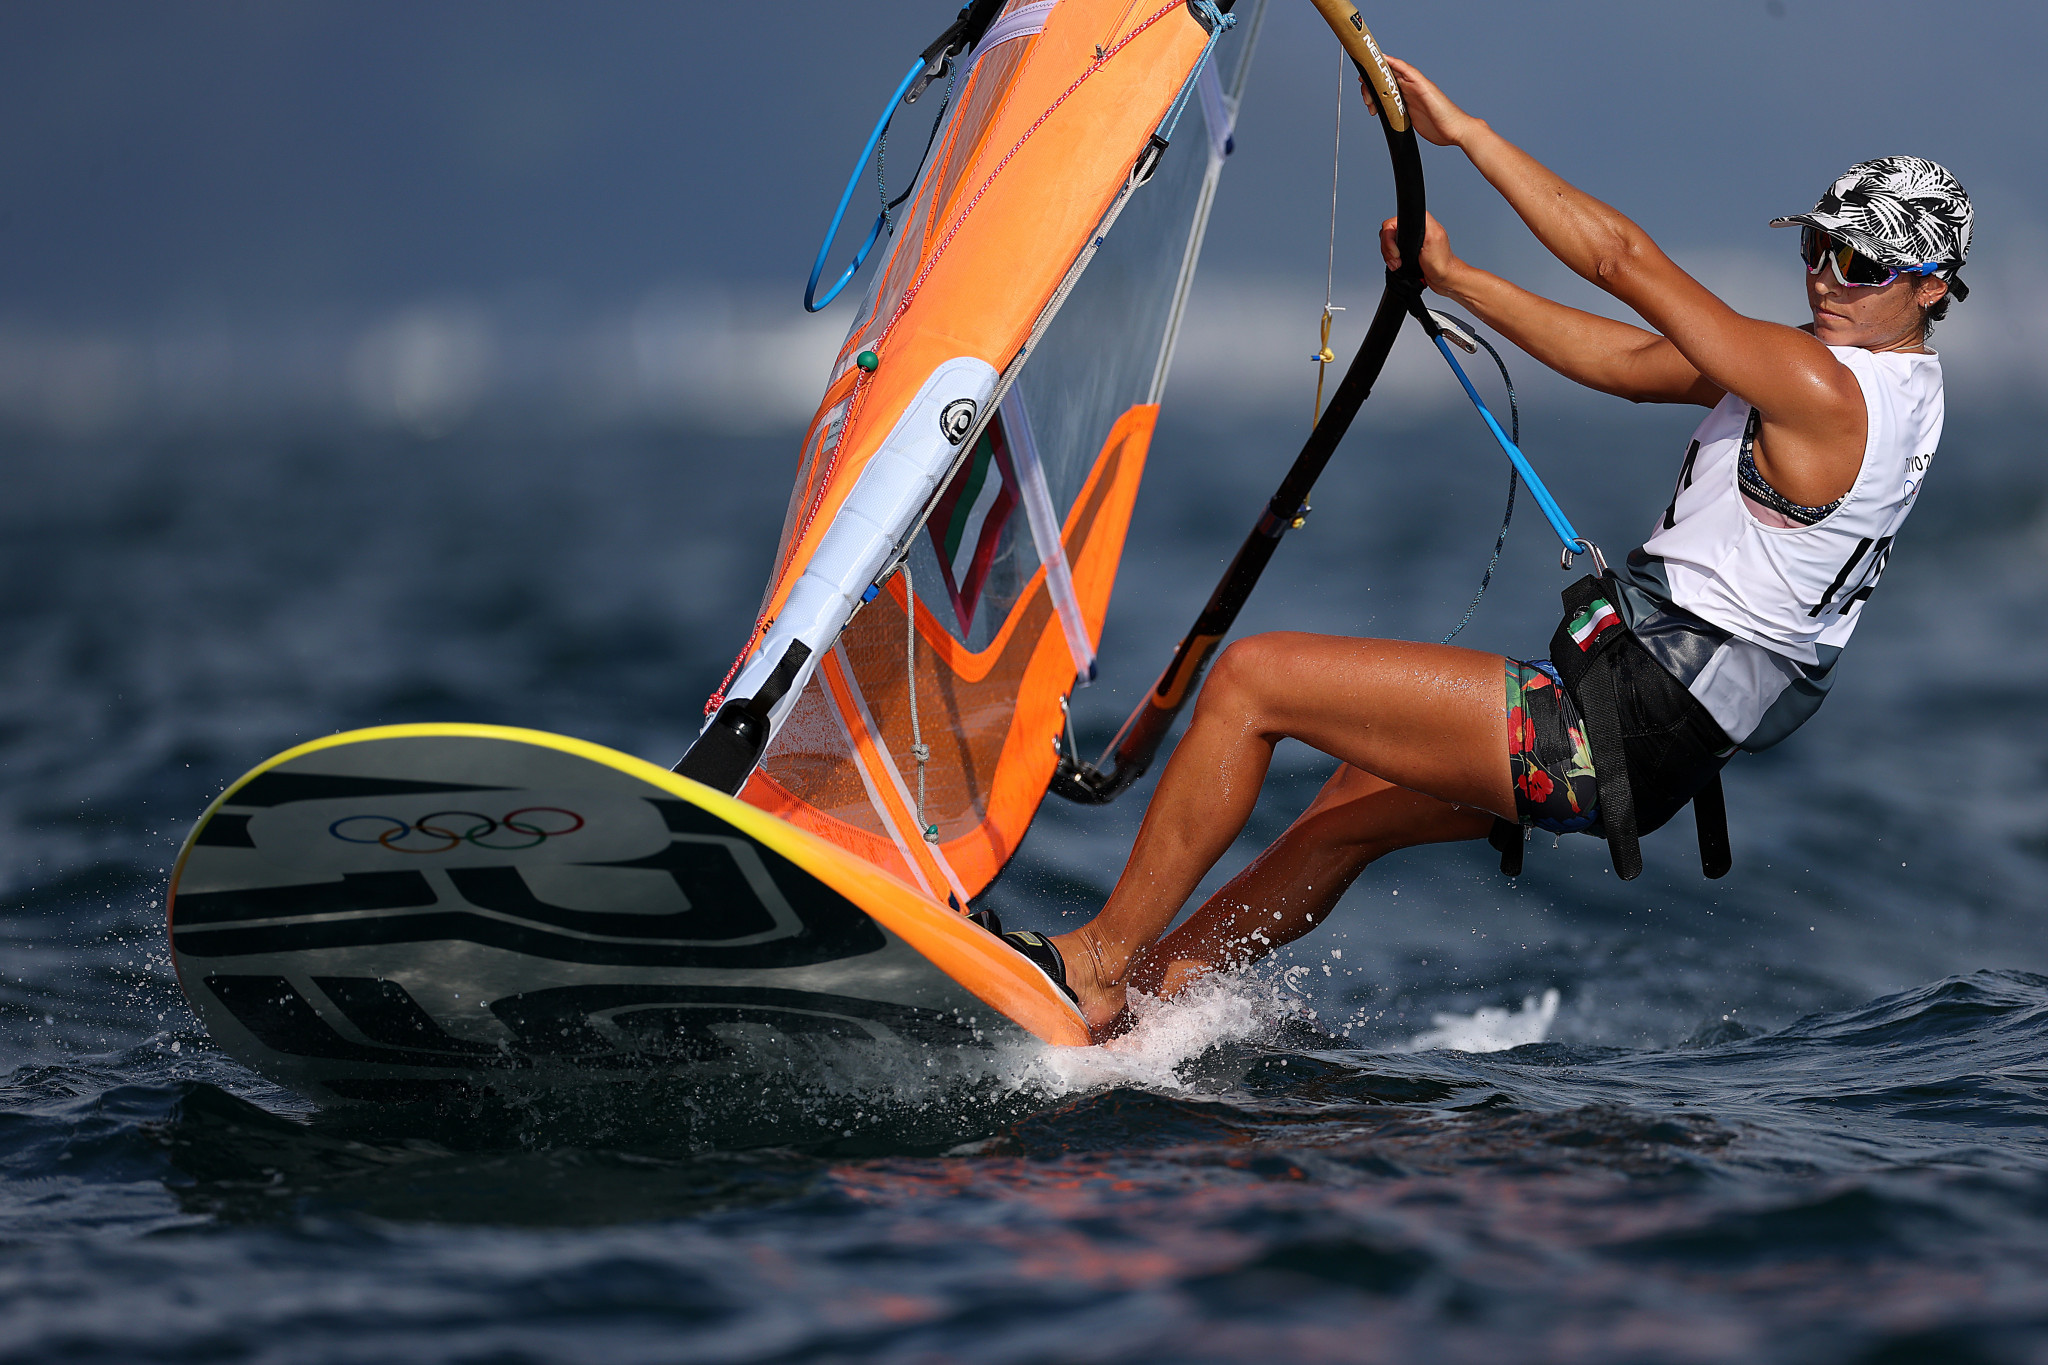 Koerdel and Maggetti make no mistake to claim iQFOiL World Championships titles